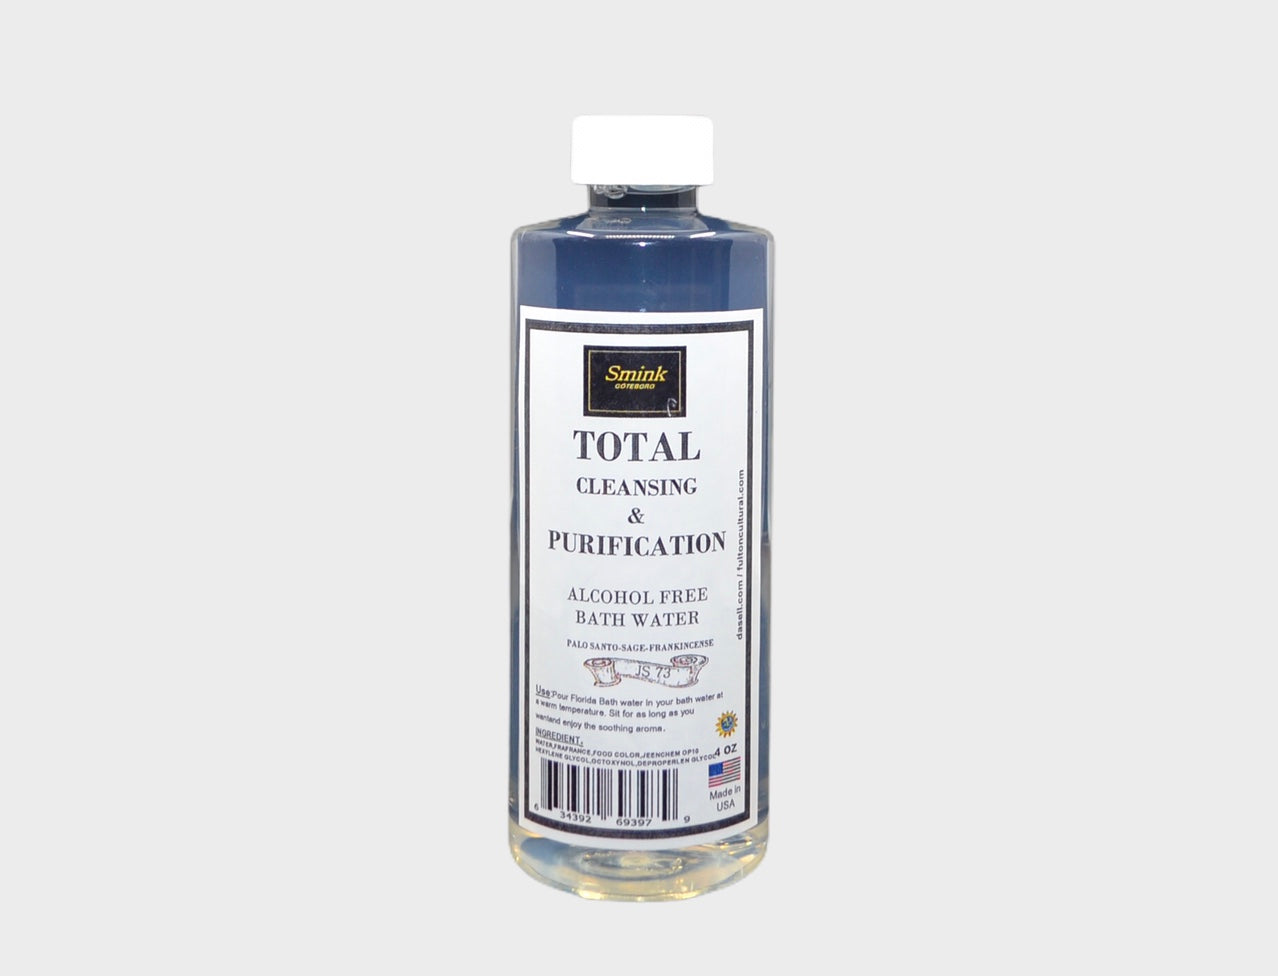 Smink Total Cleansing & Purification Bath Water